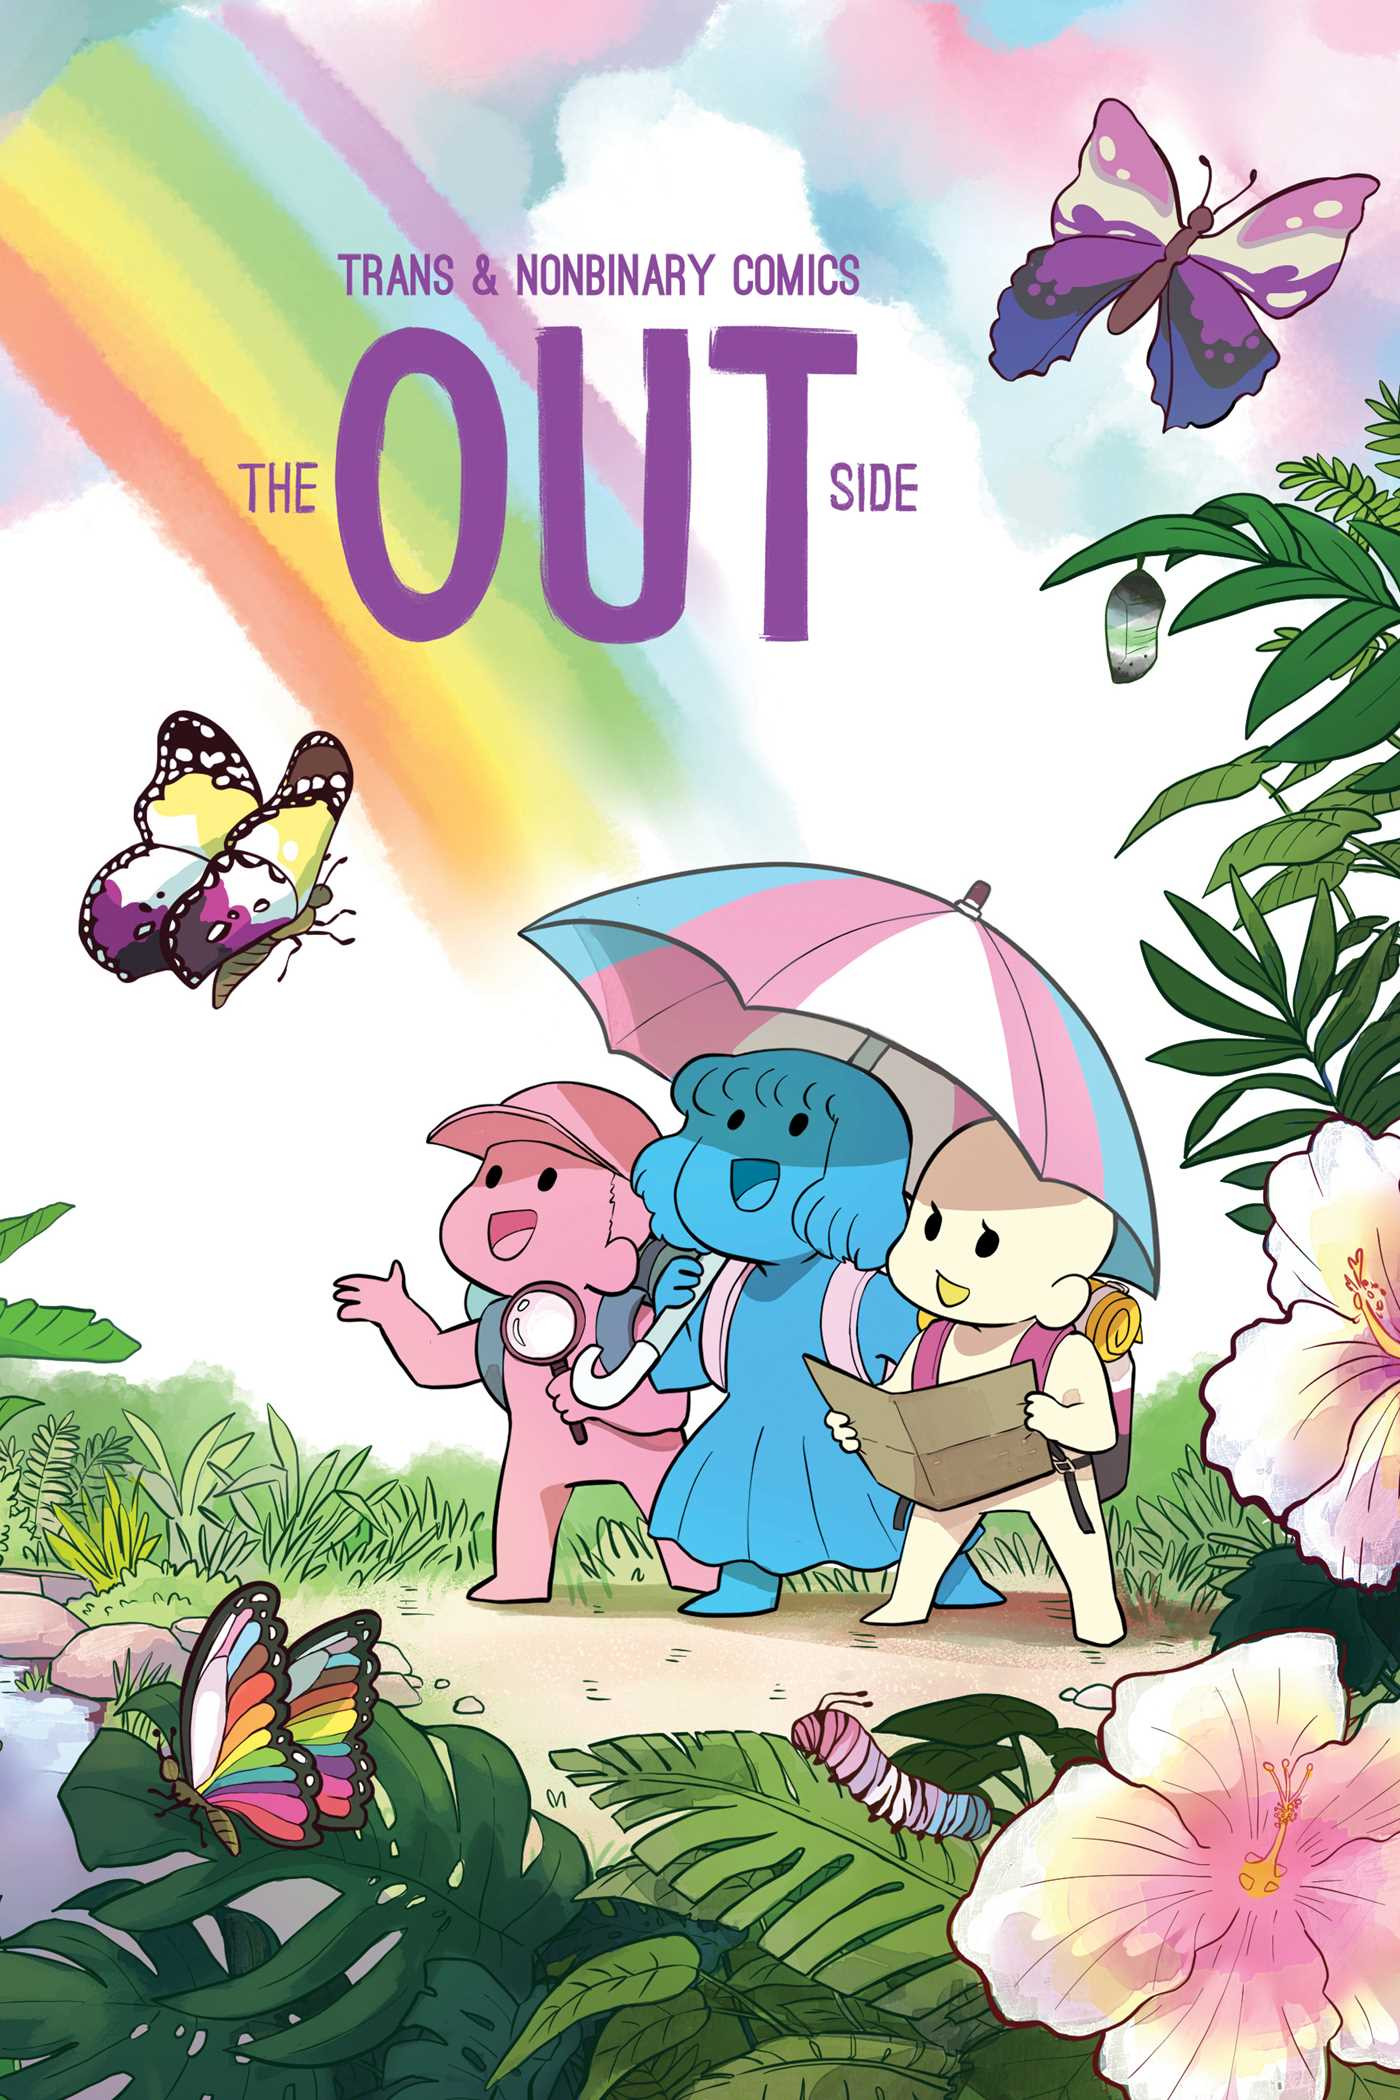 The OUT Side: Trans and Nonbinary Comics